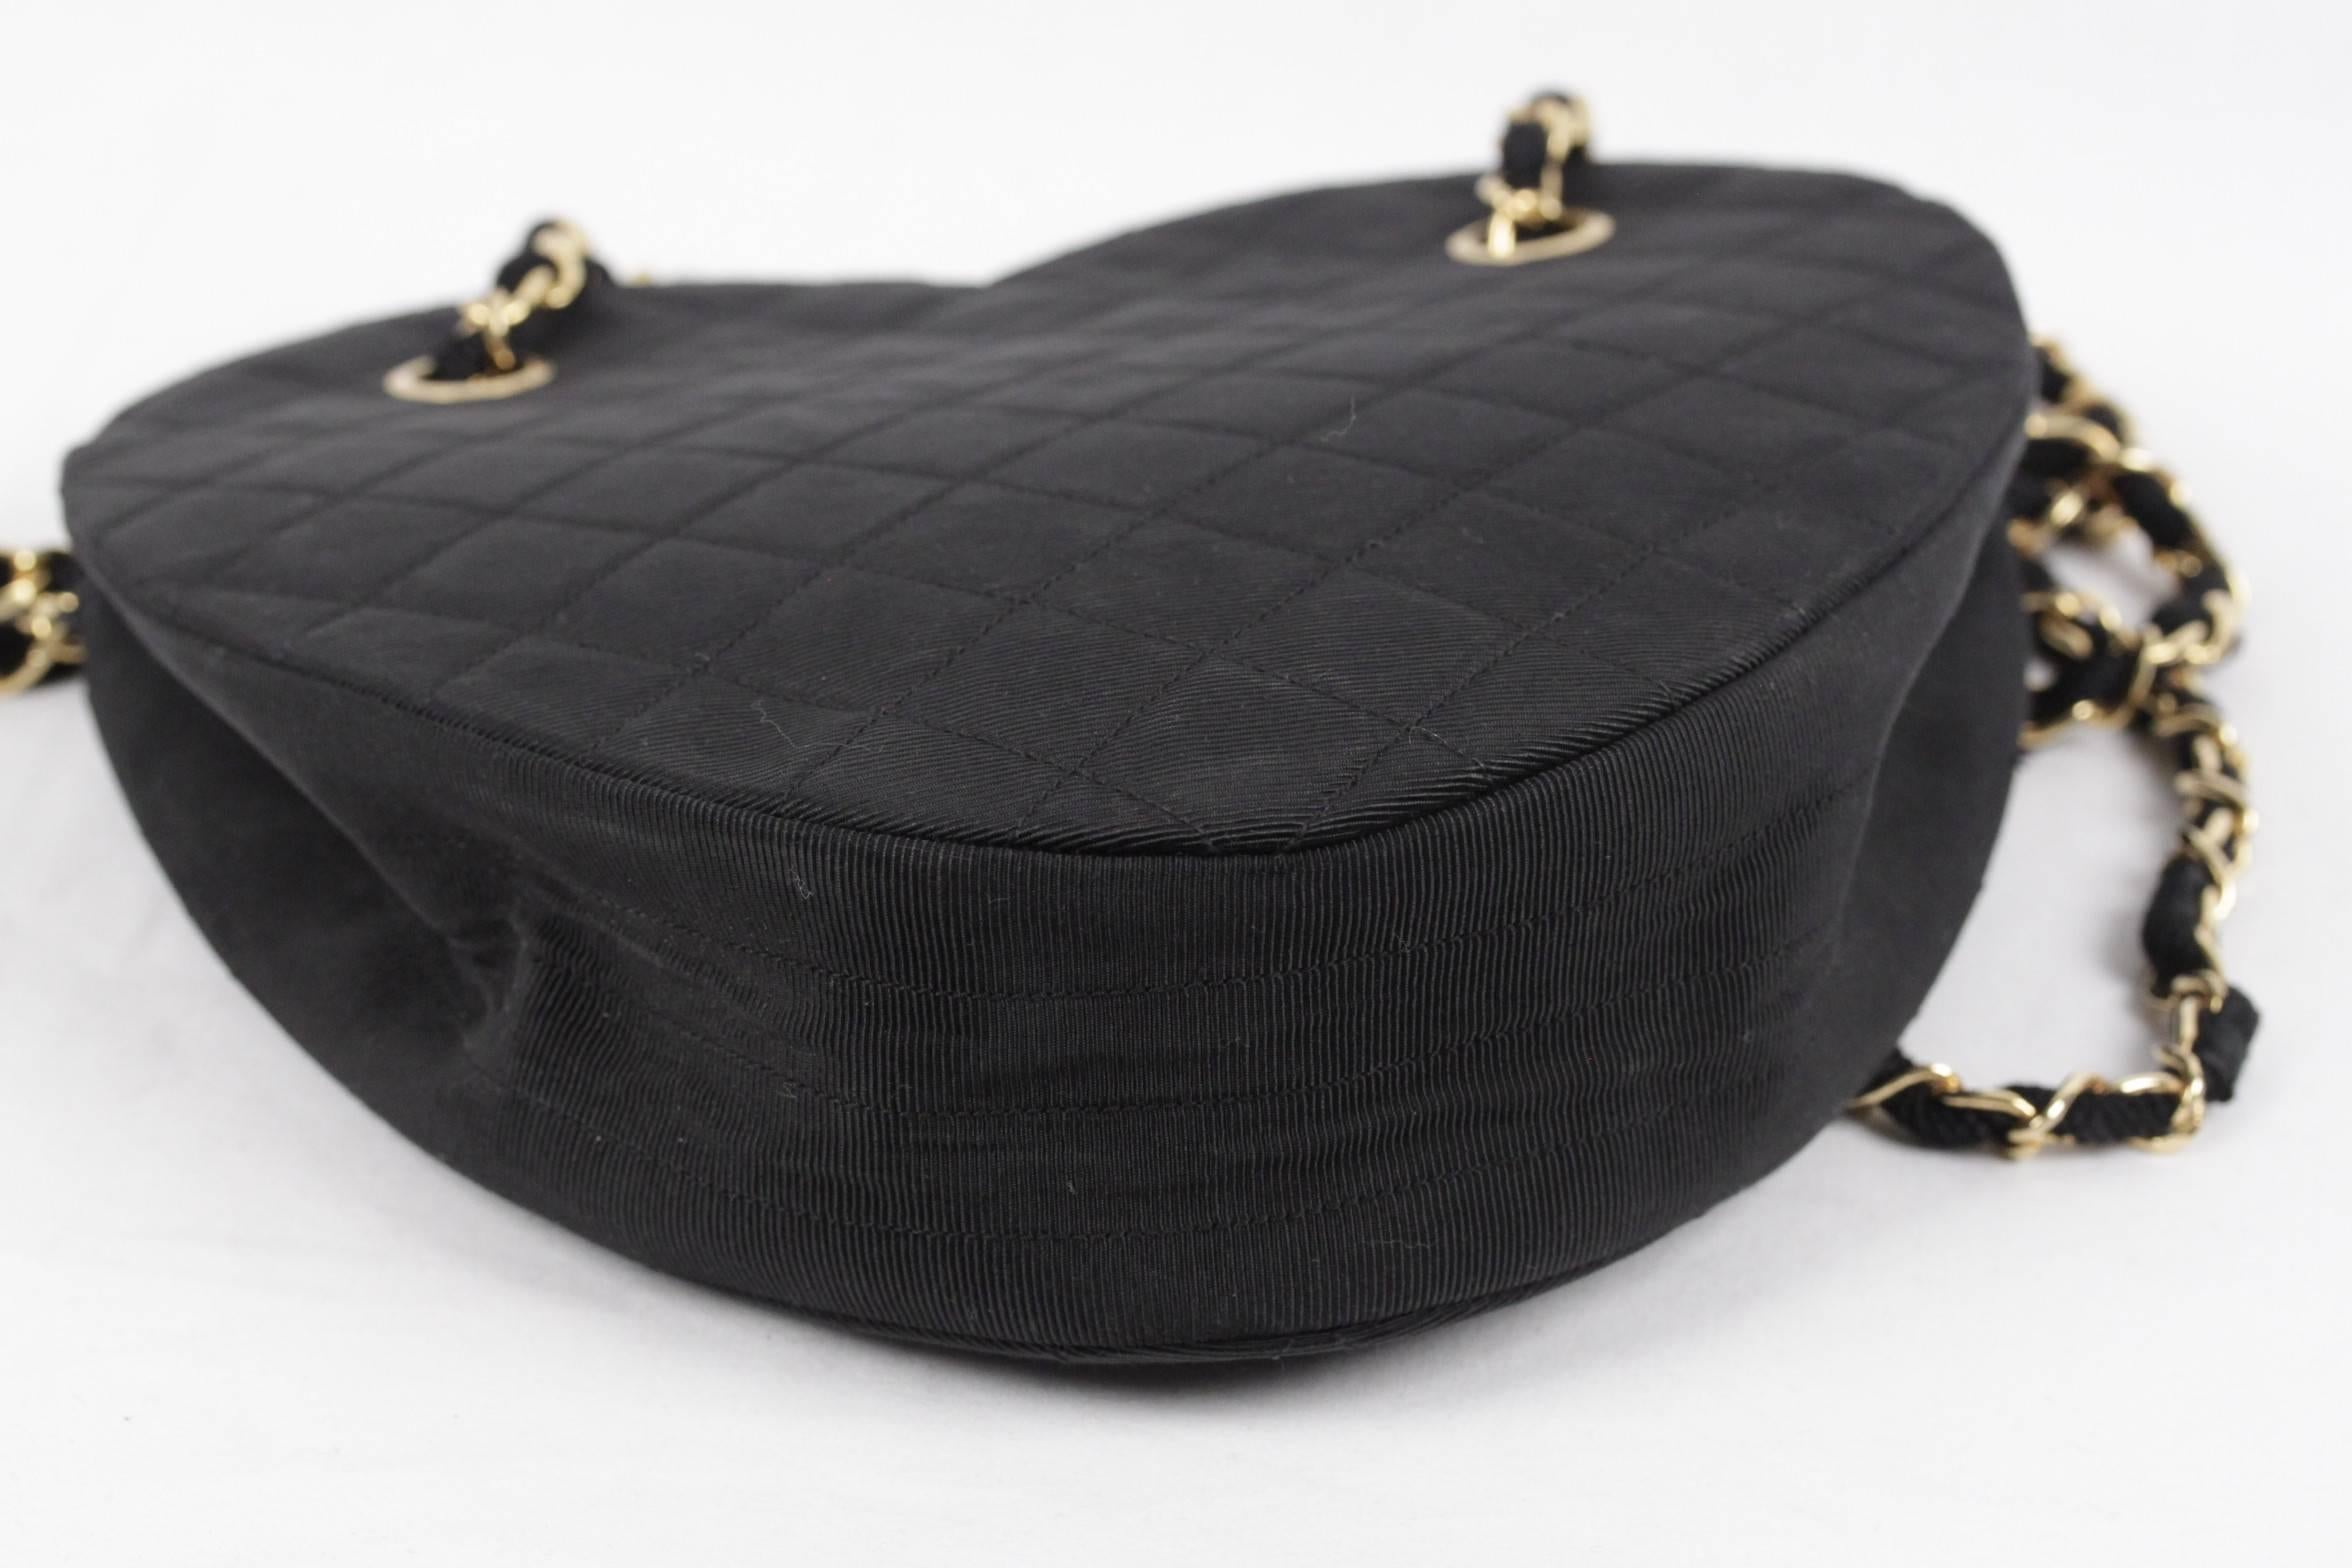 Women's CHANEL Vintage Black Quilted Fabric HEART SHAPED MESSENGER BAG Rare